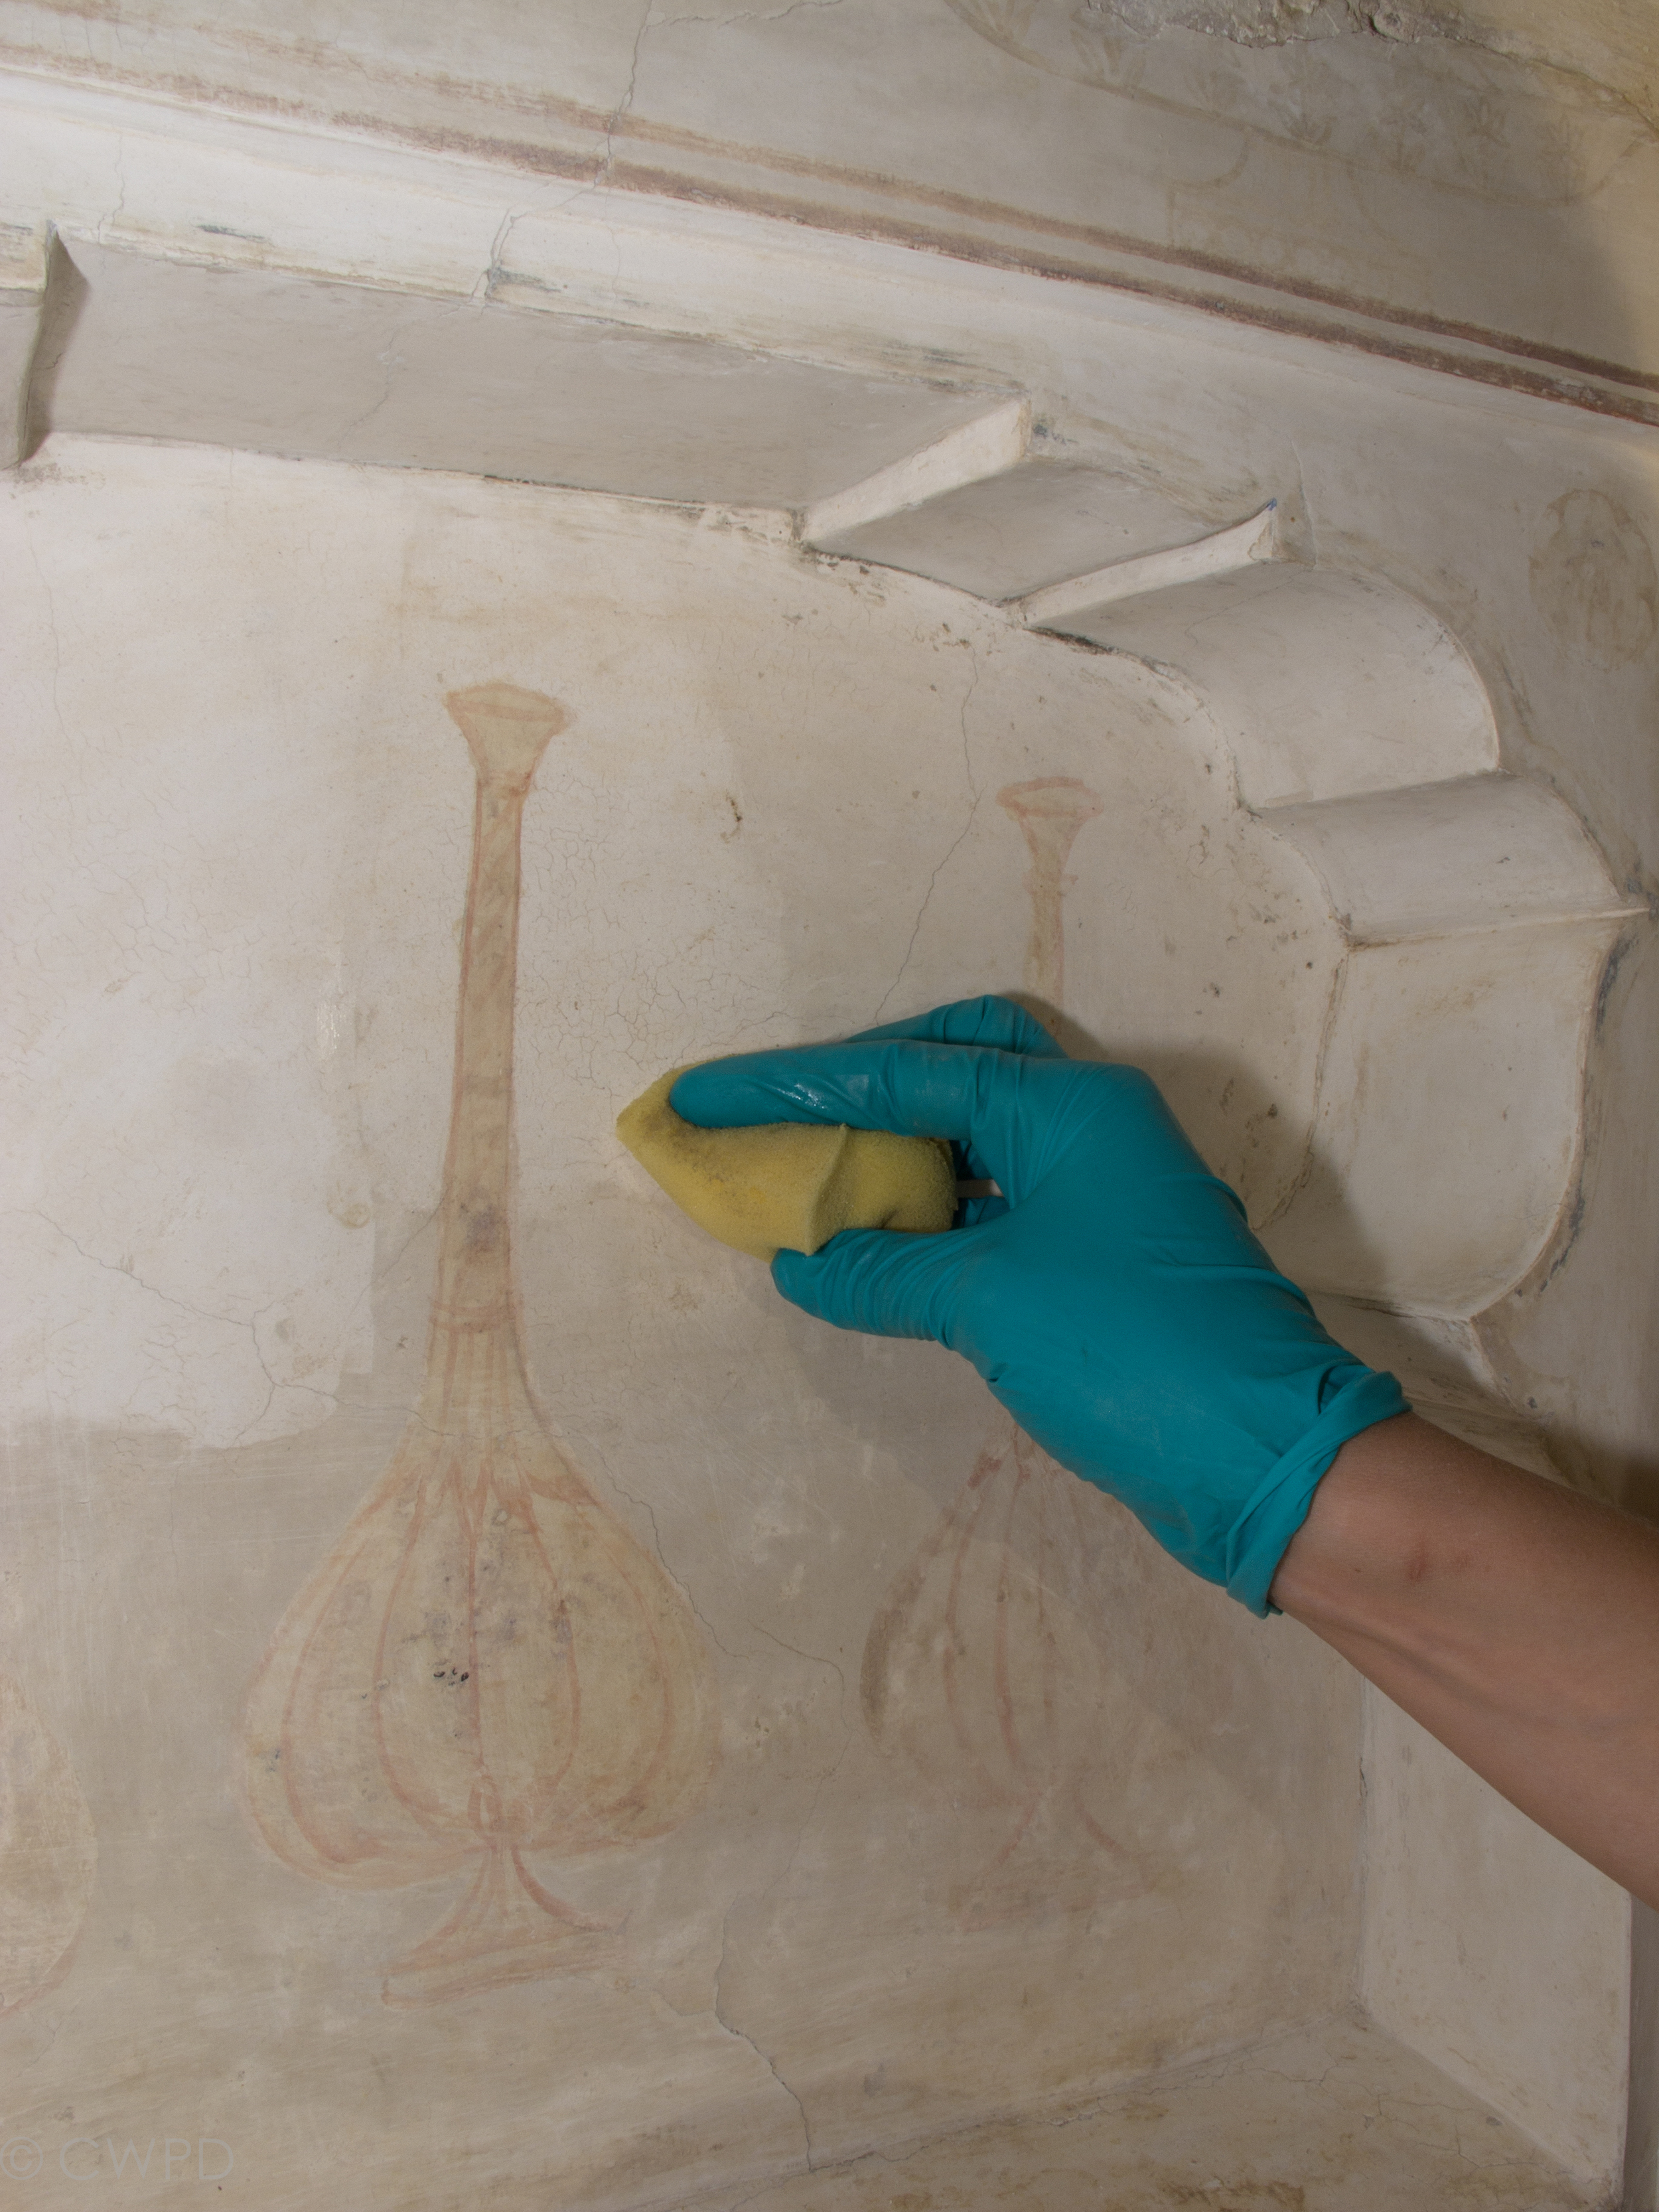  Sponges were used to clear the loosened dirt layer from the surface of the wall, leaving the painted surfaces unaffected.&nbsp;  Image © Courtauld CWPD 